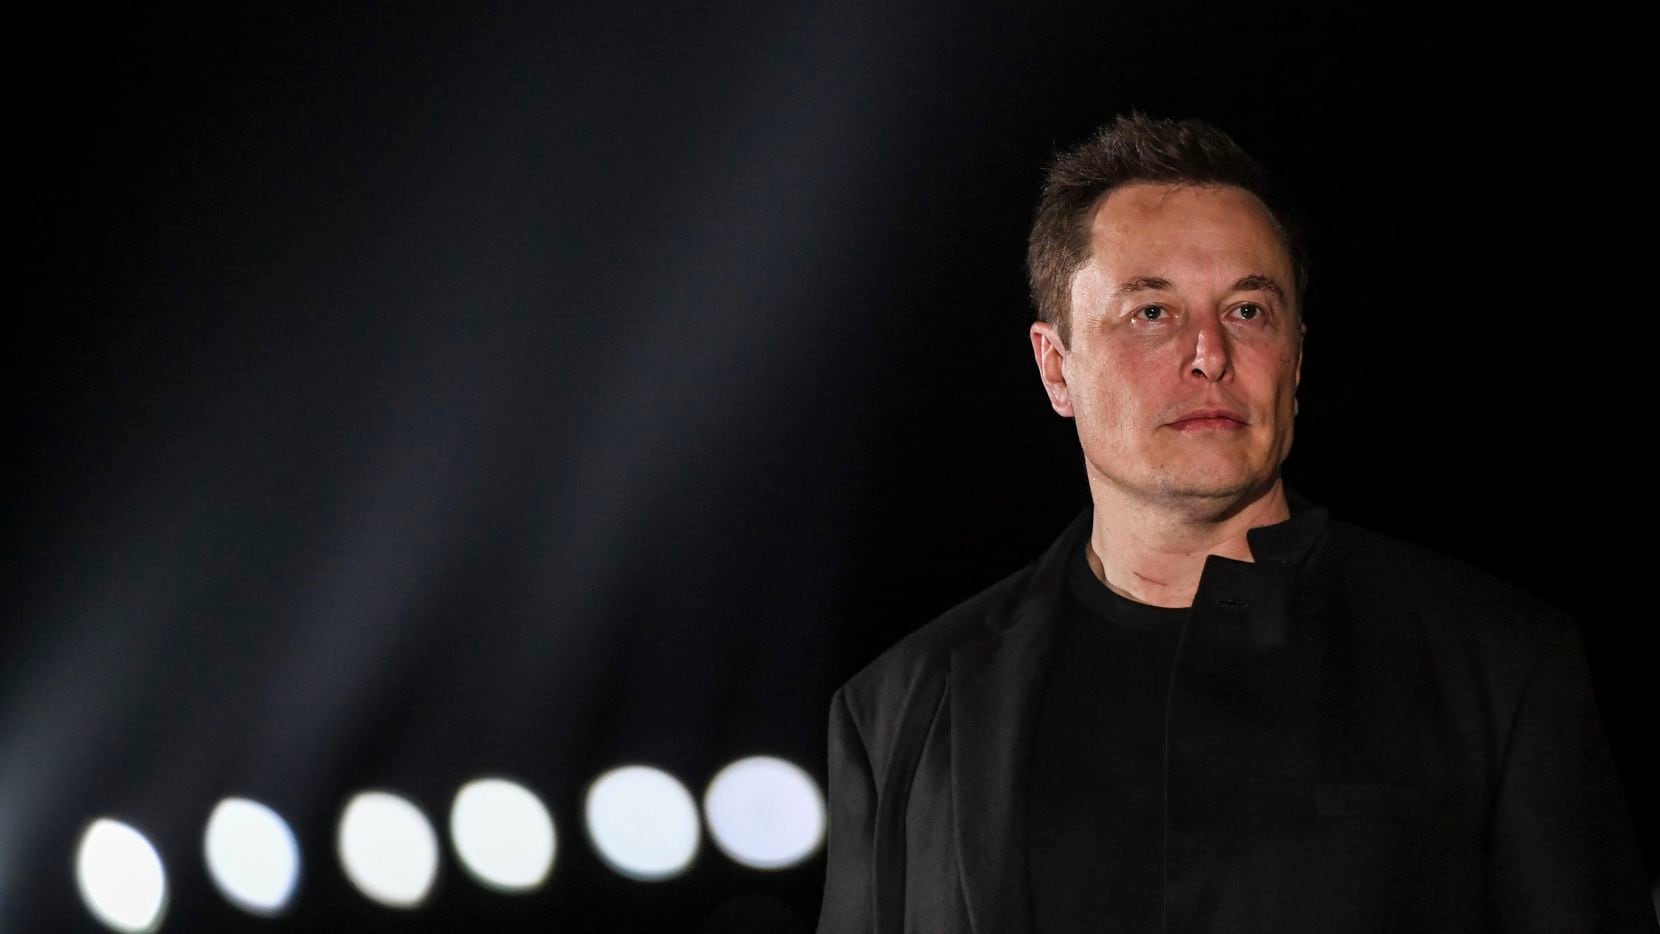 Elon Musk, the billionaire owner of SpaceX, intends to drill wells close to the company’s...